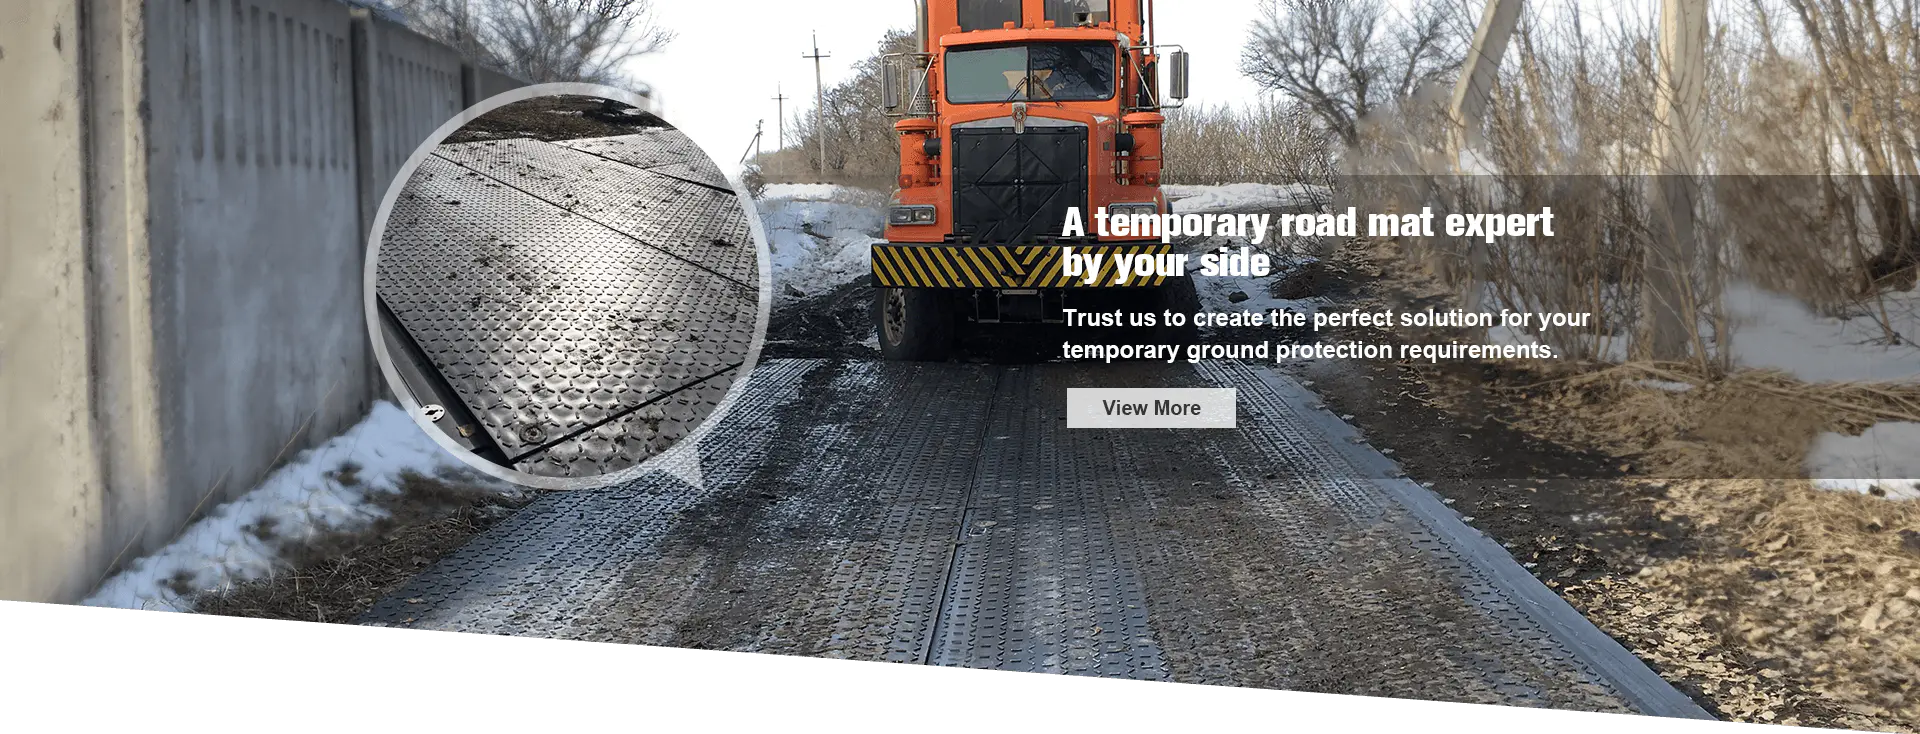 A temporary road mat expert by your side